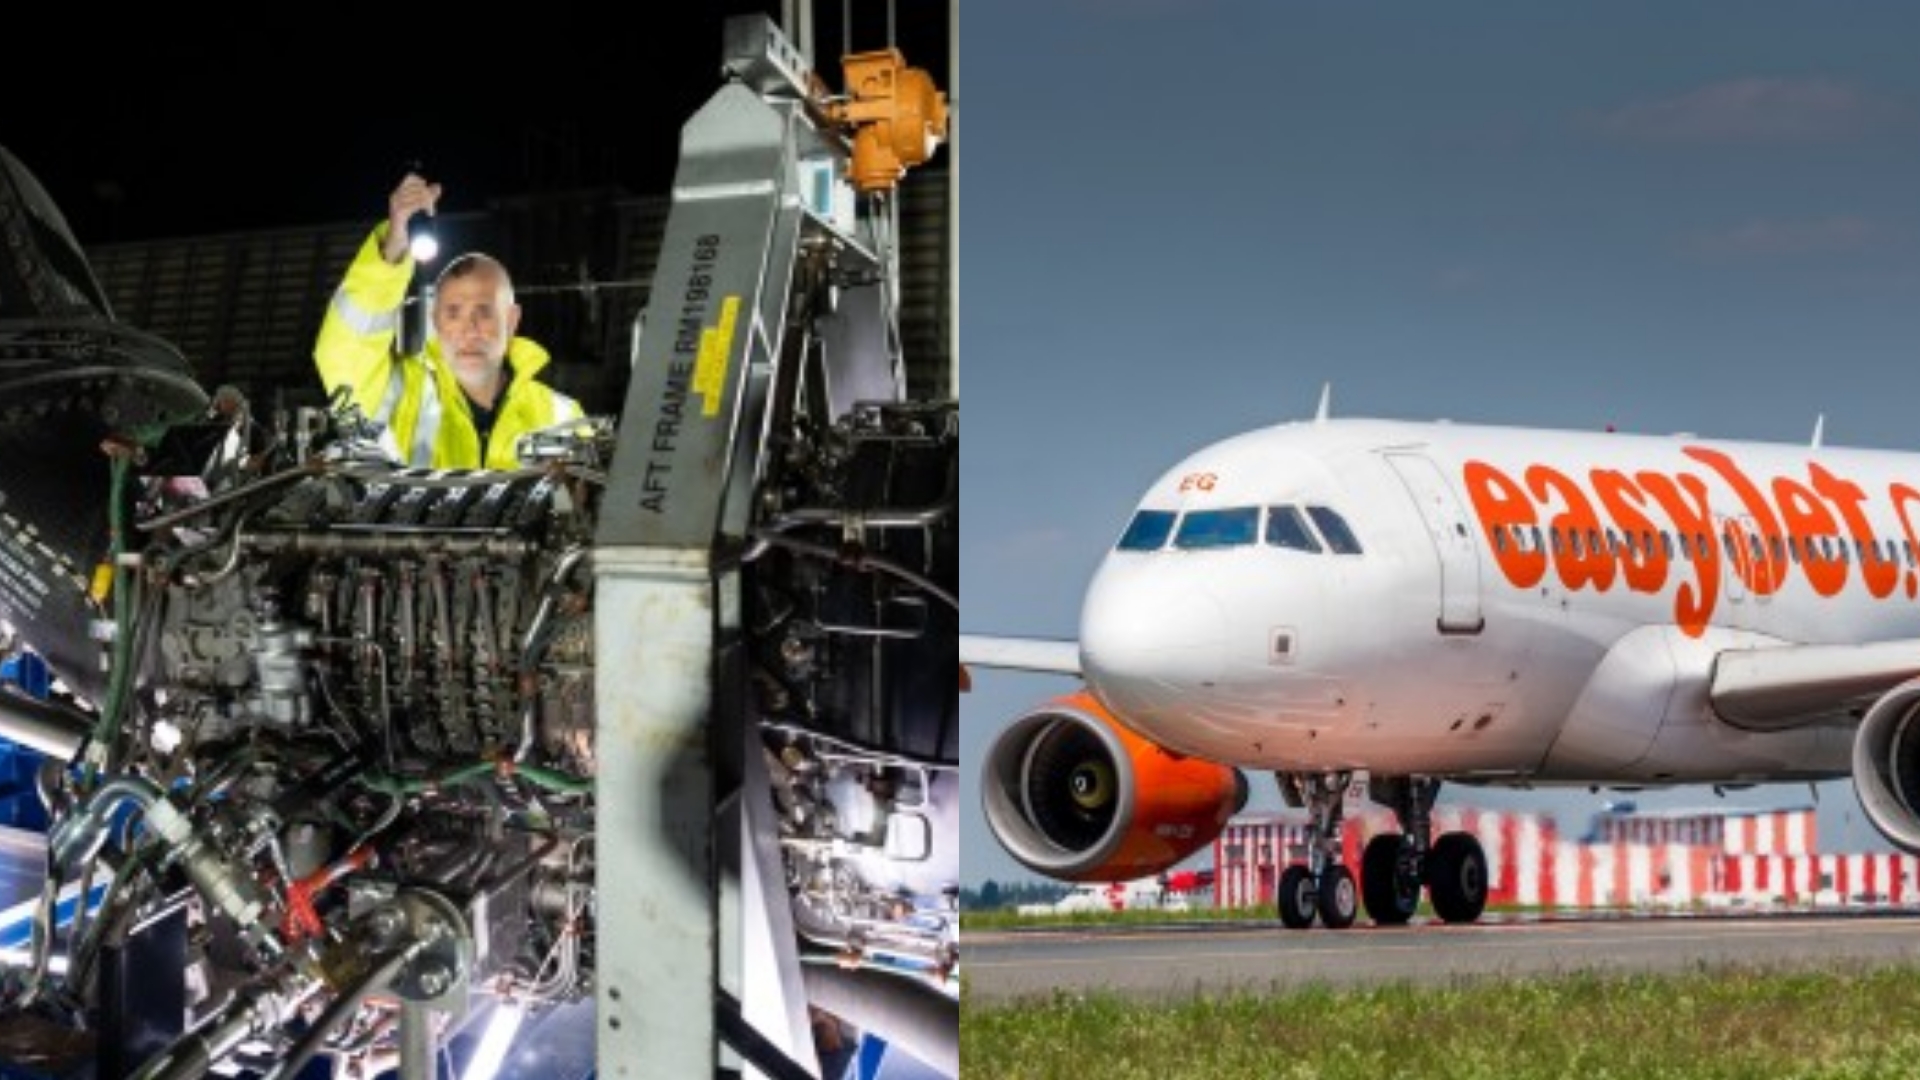 EasyJet and Rolls-Royce successfully test hydrogen-powered jet engine